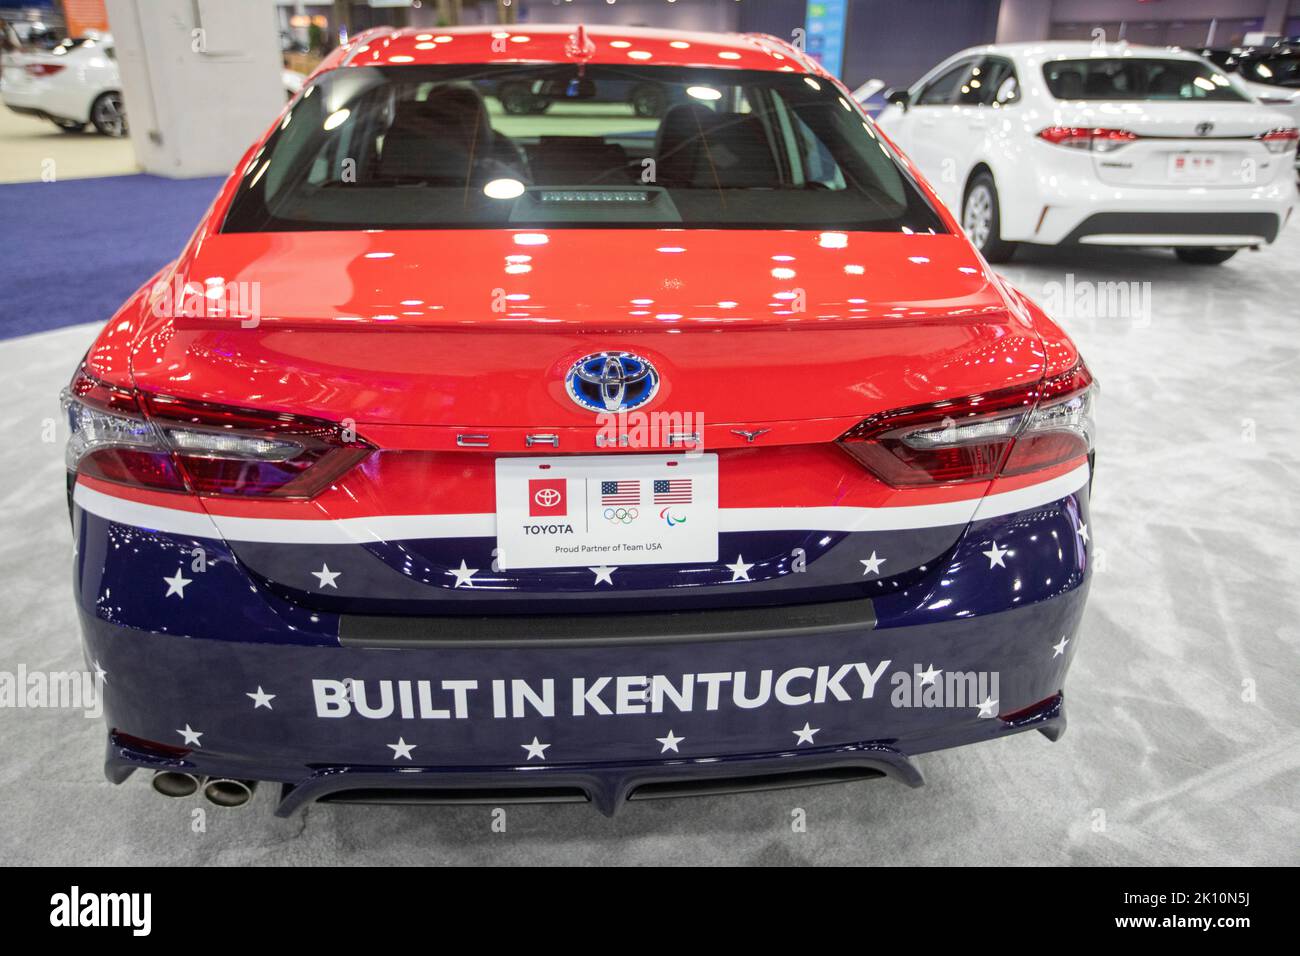 Detroit, Michigan, USA. 14th Sep, 2022. The Toyota Camry on display at the North American International Auto Show. The Japanese company advertises that its vehicles are made in America. However, its American plants are not unionized. Credit: Jim West/Alamy Live News Stock Photo